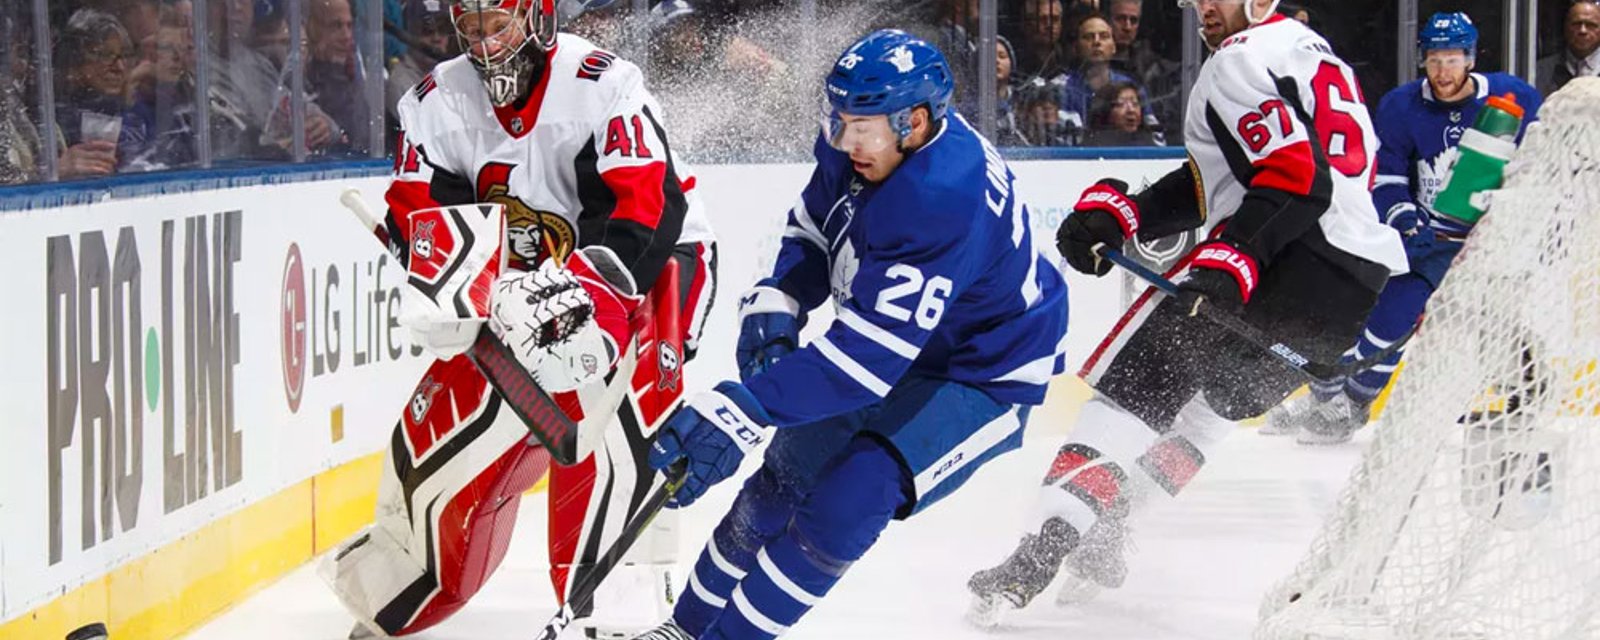 Report: Leafs fans pay INSANE prices for preseason game against Sens